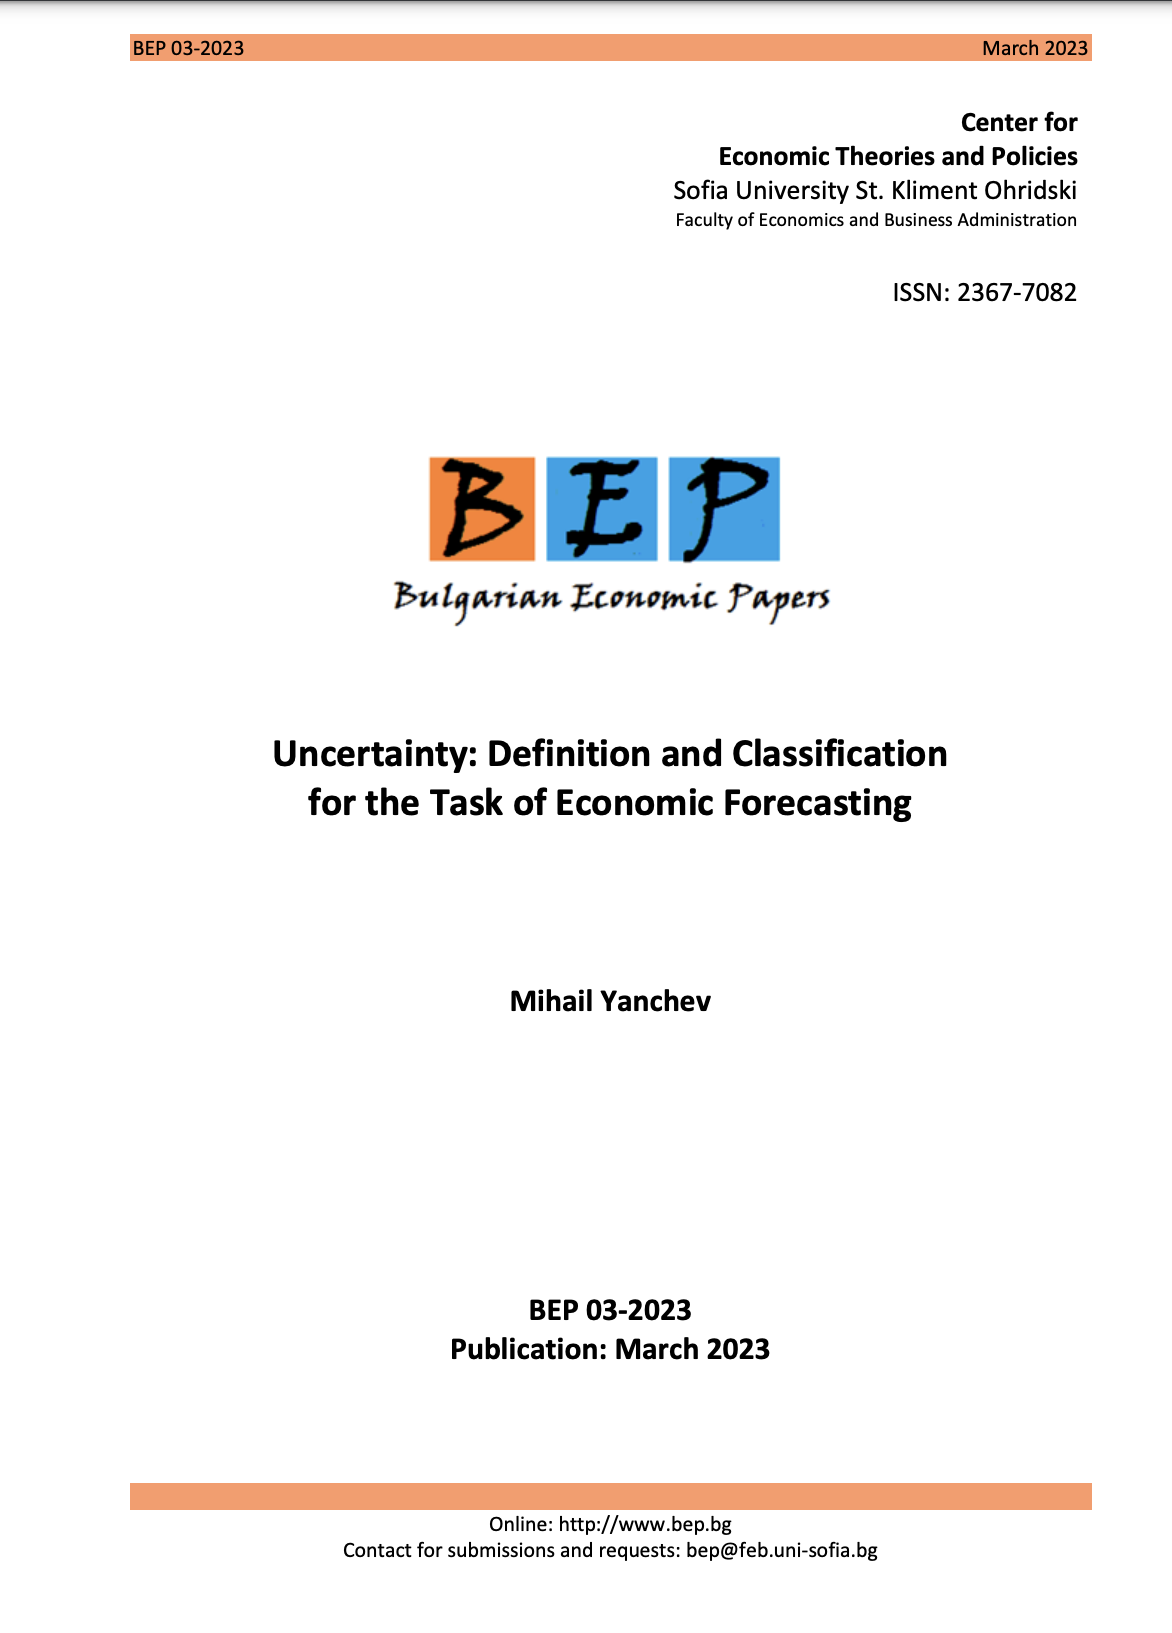 Uncertainty: Definition and Classification for the Task of Economic Forecasting Cover Image